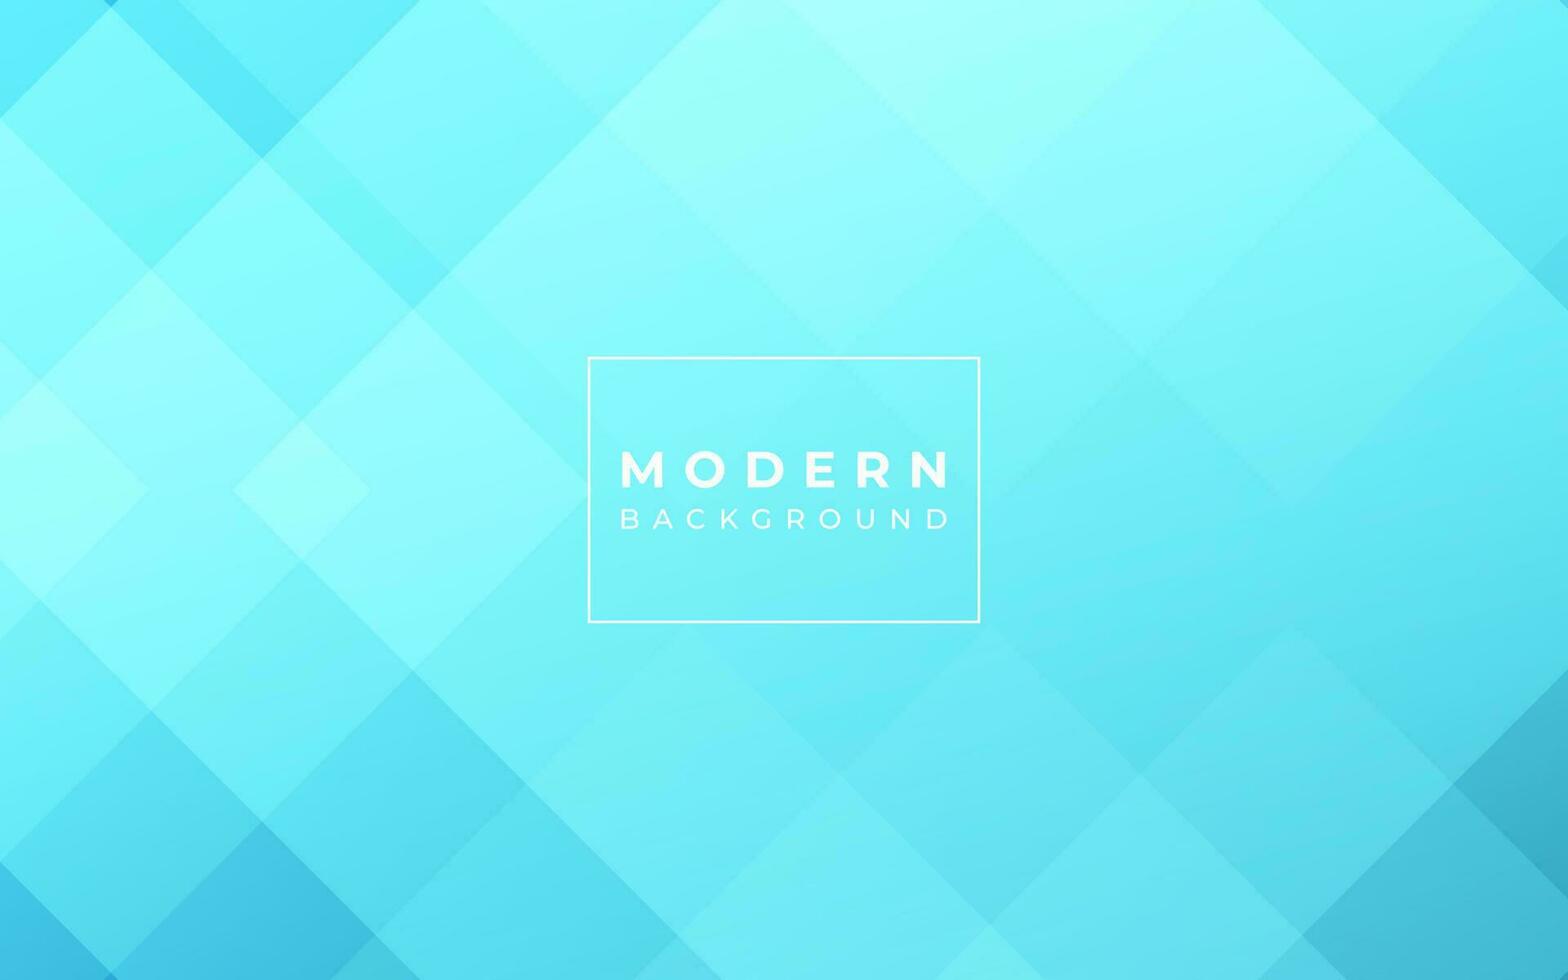 Modern background, geometric style, light blue gradation, layered, abstract vector